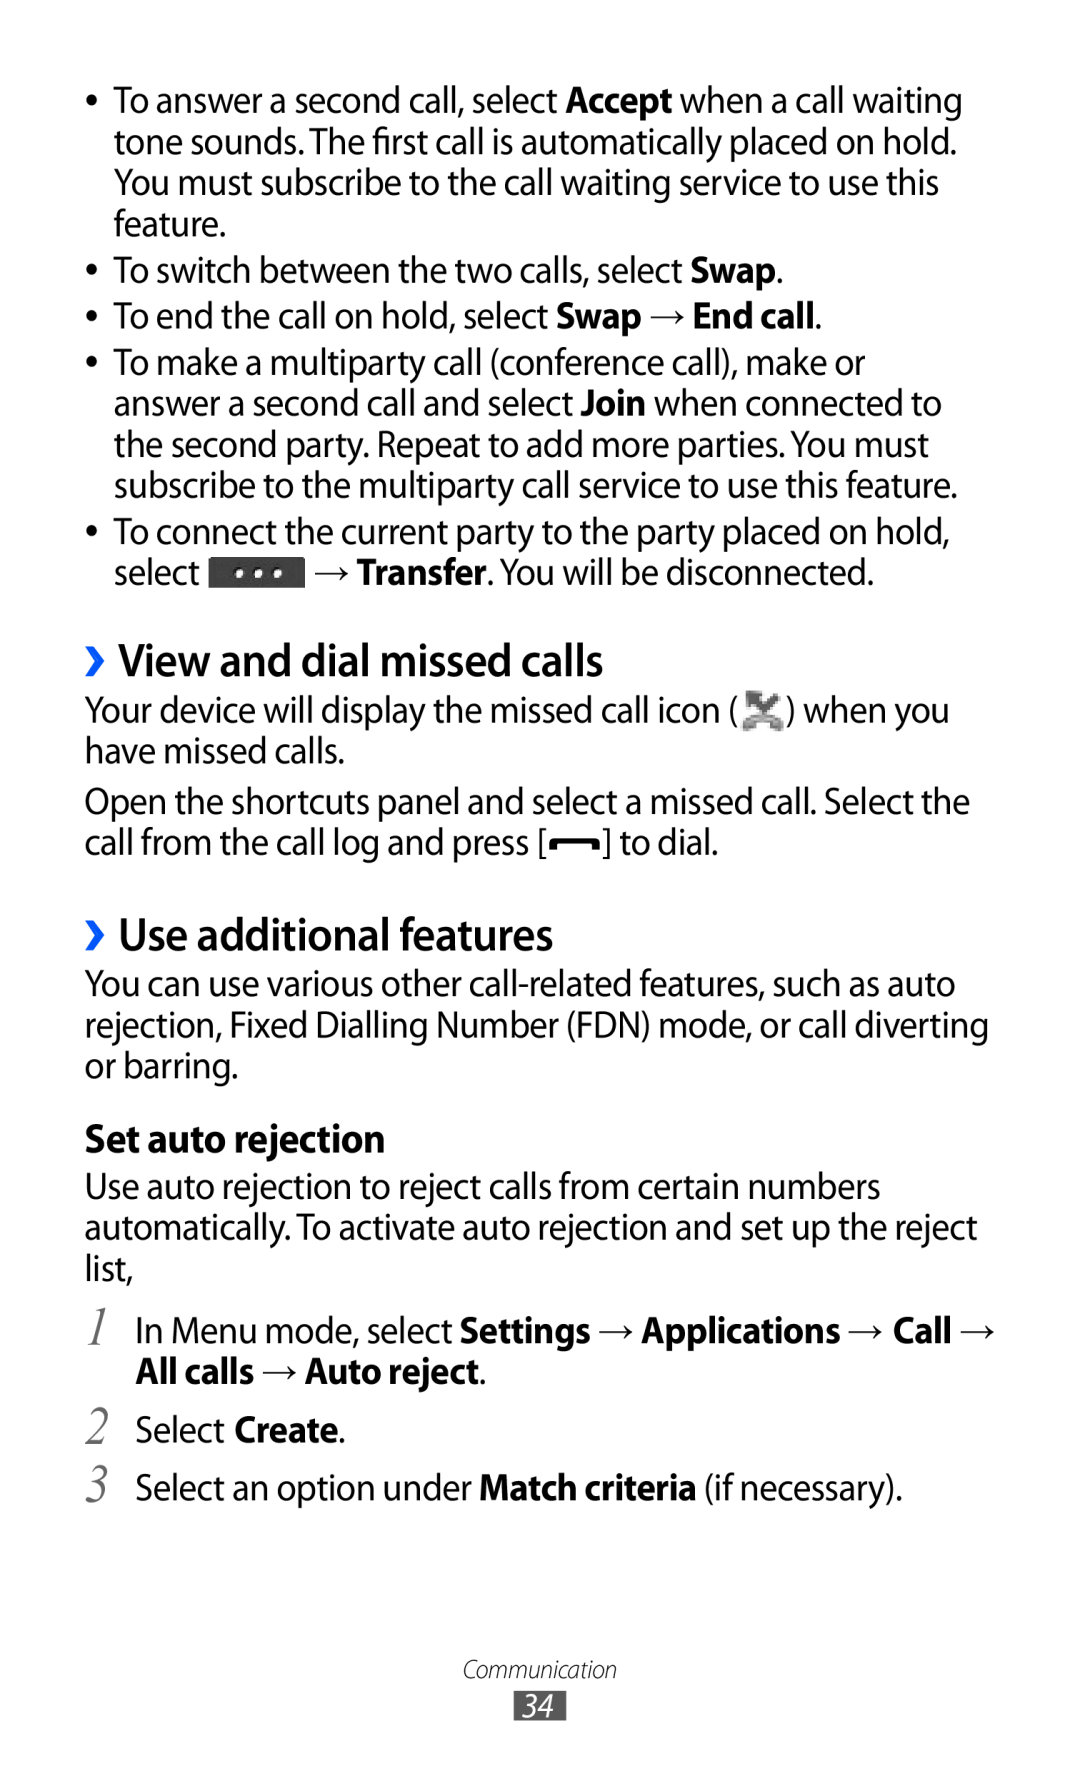 Samsung GT-C6712XKASER, GT-C6712LKACIT manual ››View and dial missed calls, ››Use additional features, Set auto rejection 